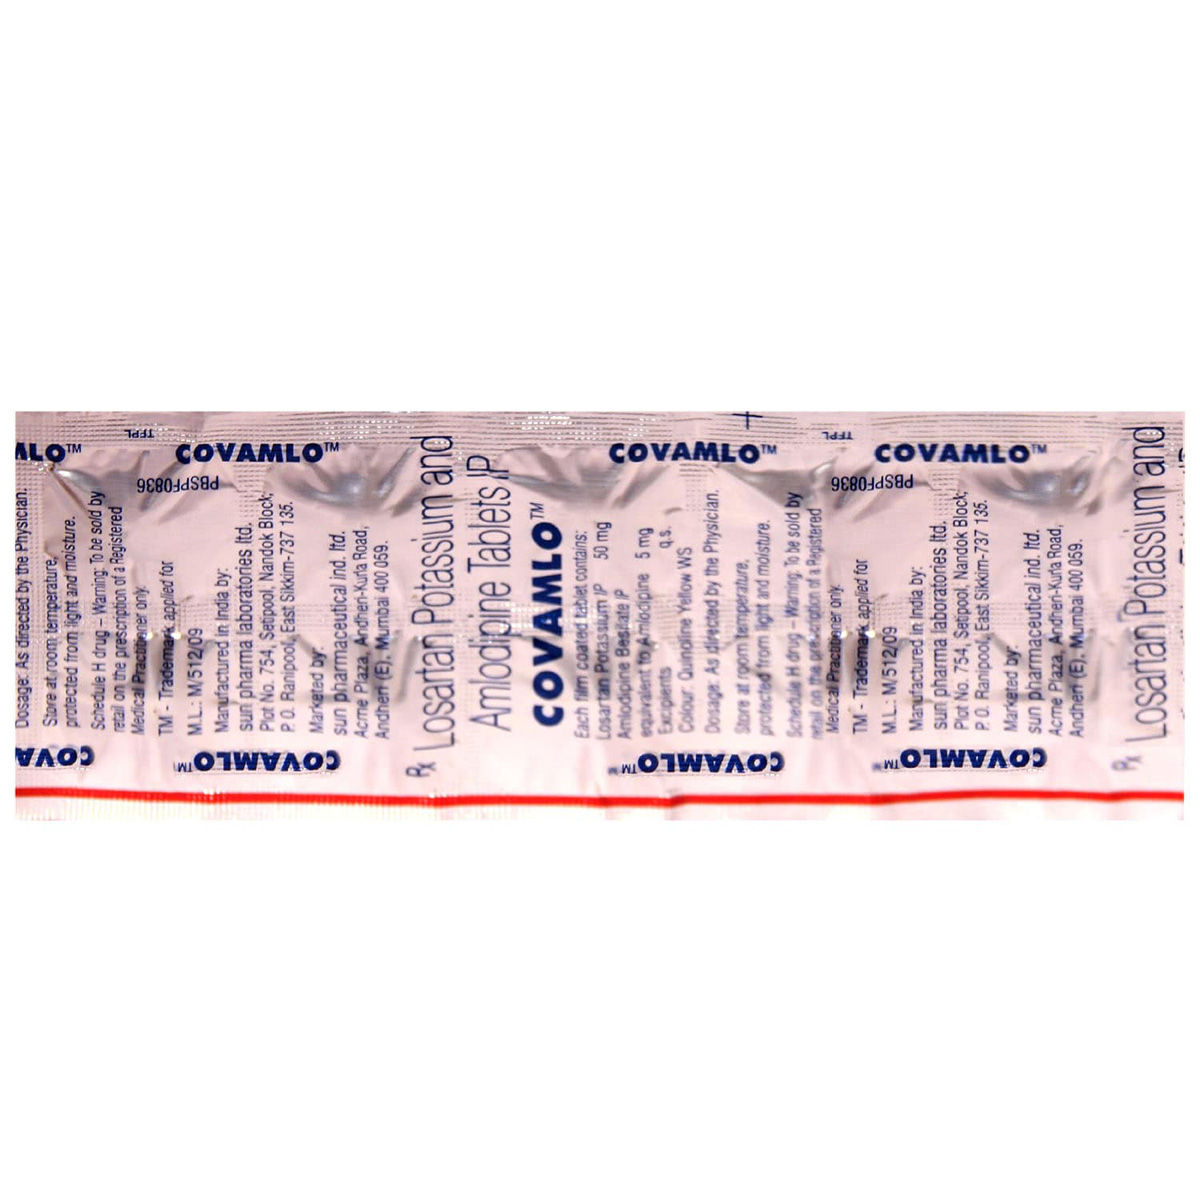 Covamlo Tablet 10's, Pack of 10 TABLETS